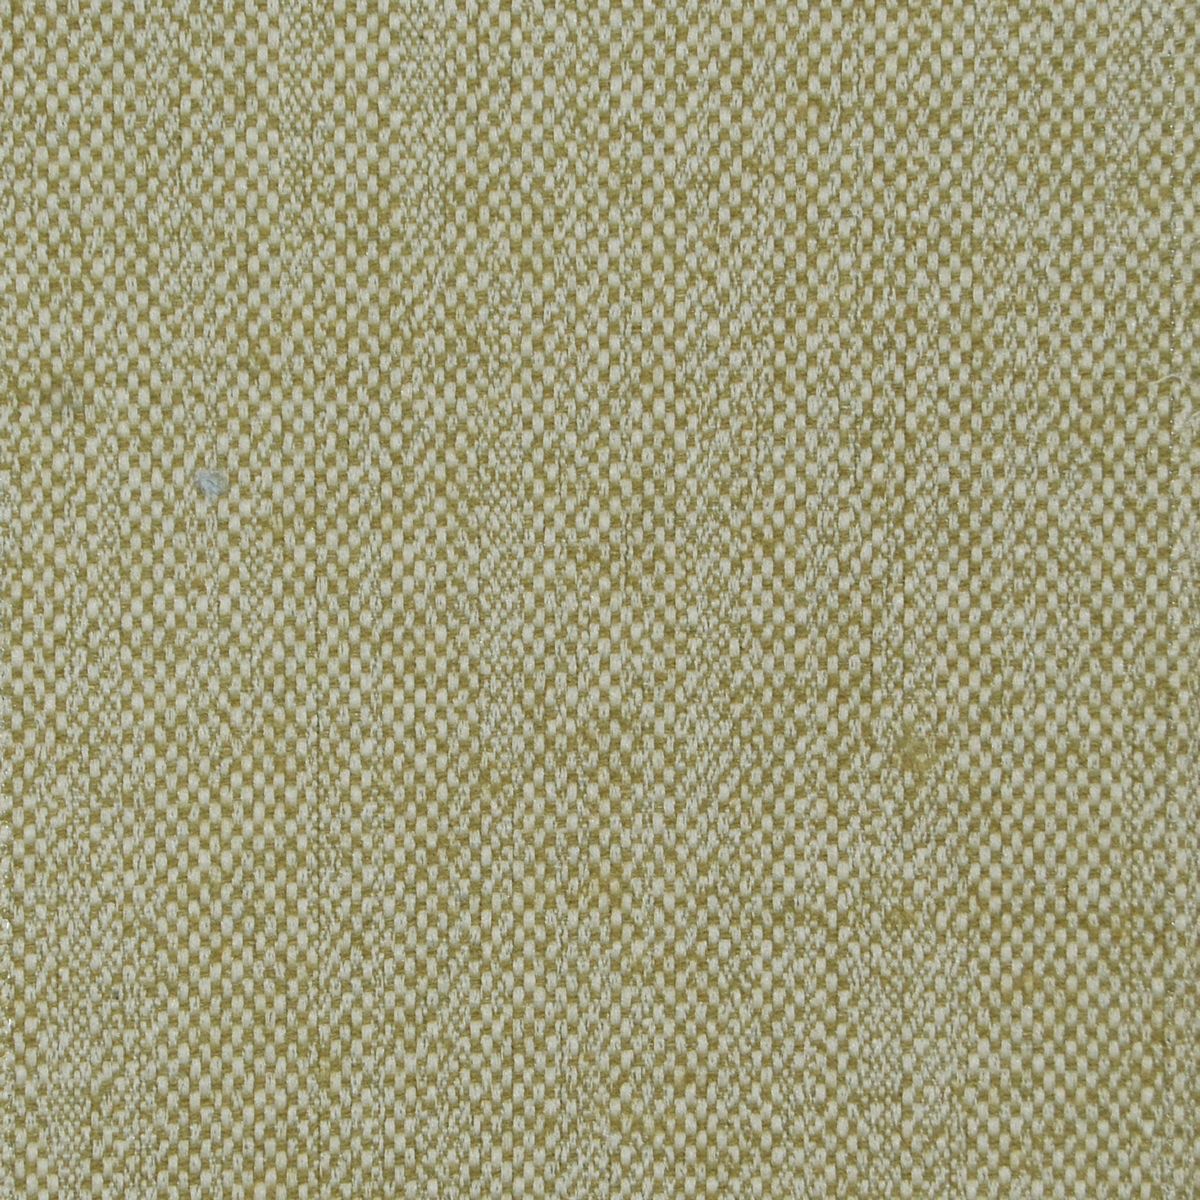 Selkirk Celery Fabric by Voyage Maison